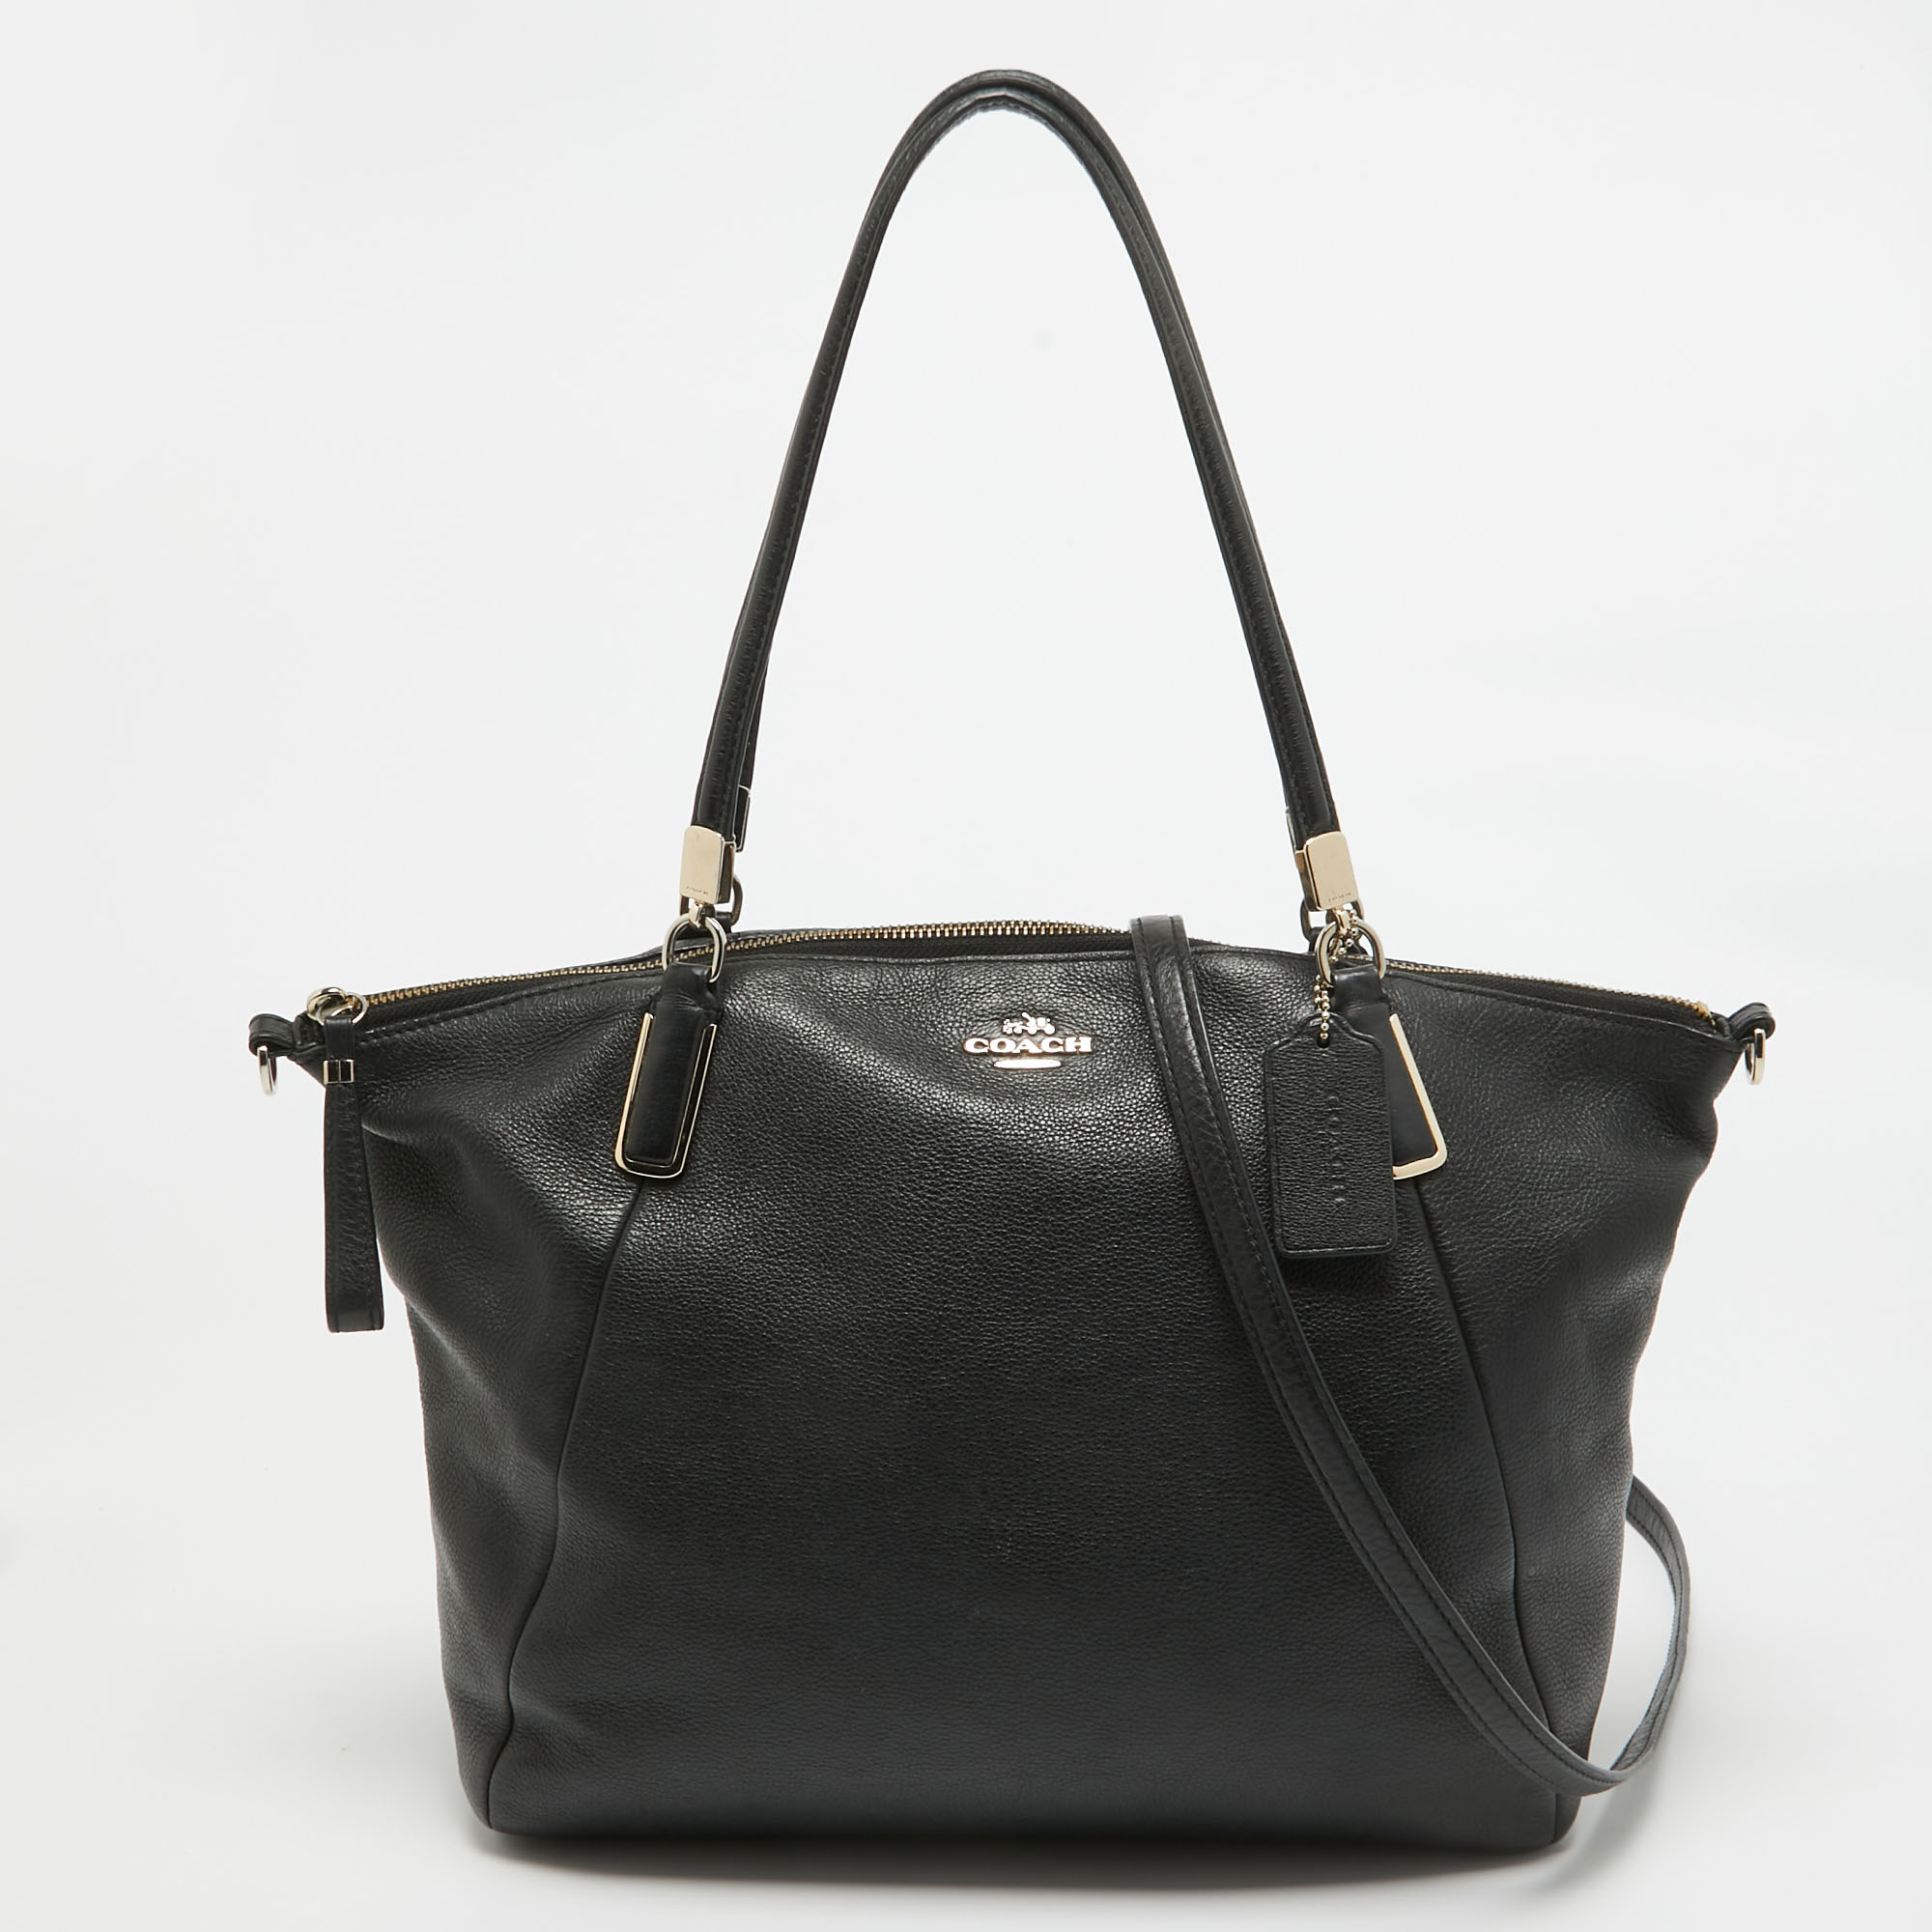 Pre-owned Coach Black Leather Kelsey Satchel